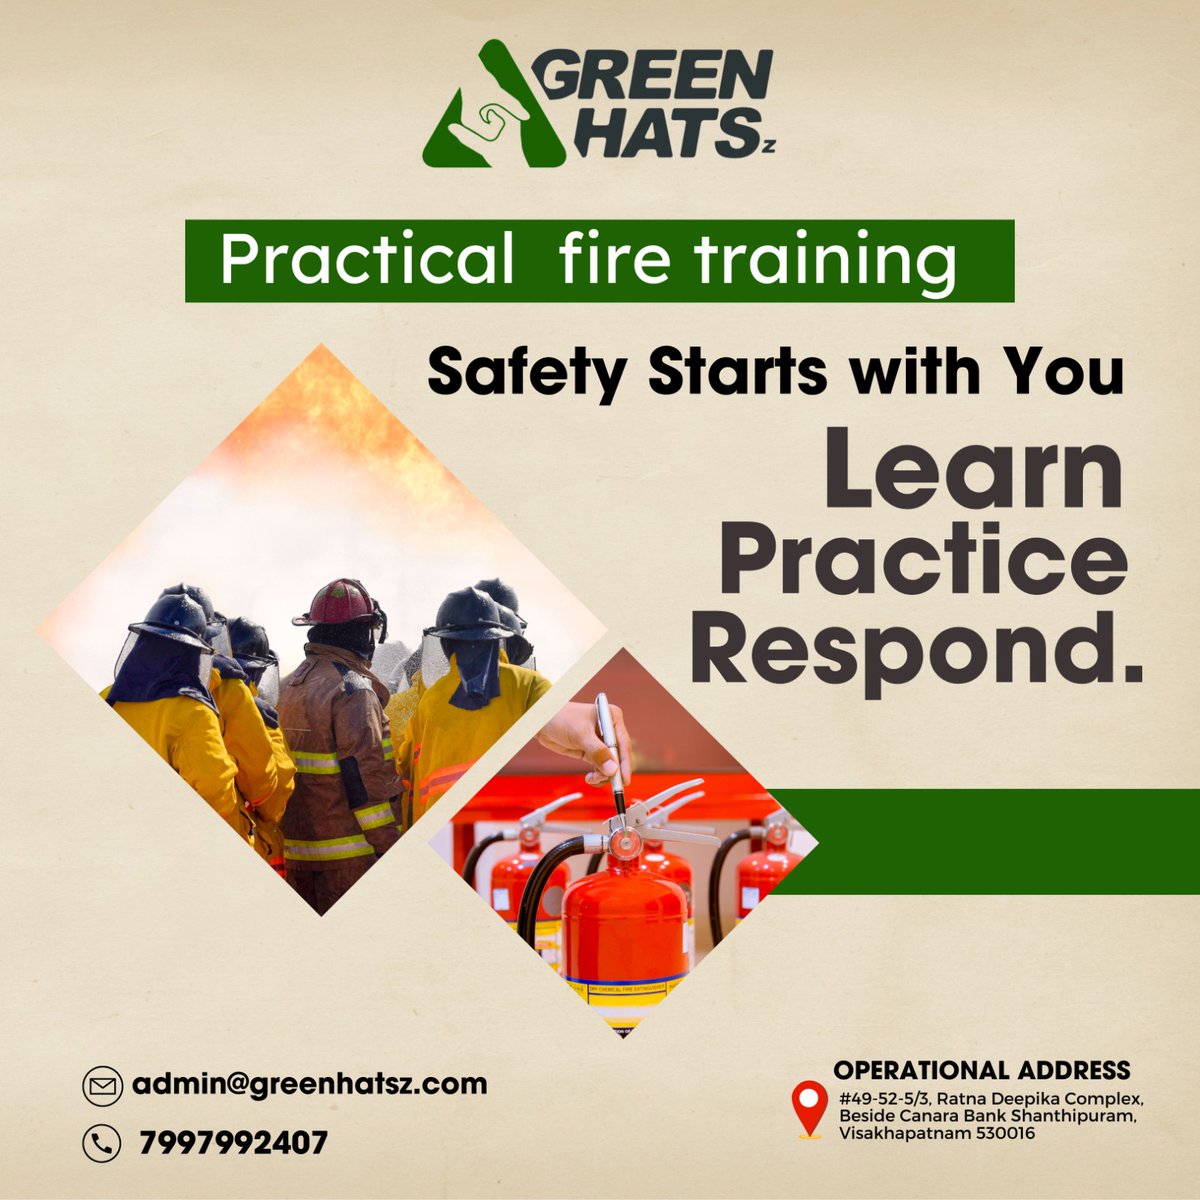 At Greenhatsz, we are committed to empowering you with the skills and knowledge necessary to effectively respond to fire emergencies. Our practical fire training courses are designed to instill confidence.
#Greenhatsz #FireSafetyDiploma #SafetyTraining #FirePrevention